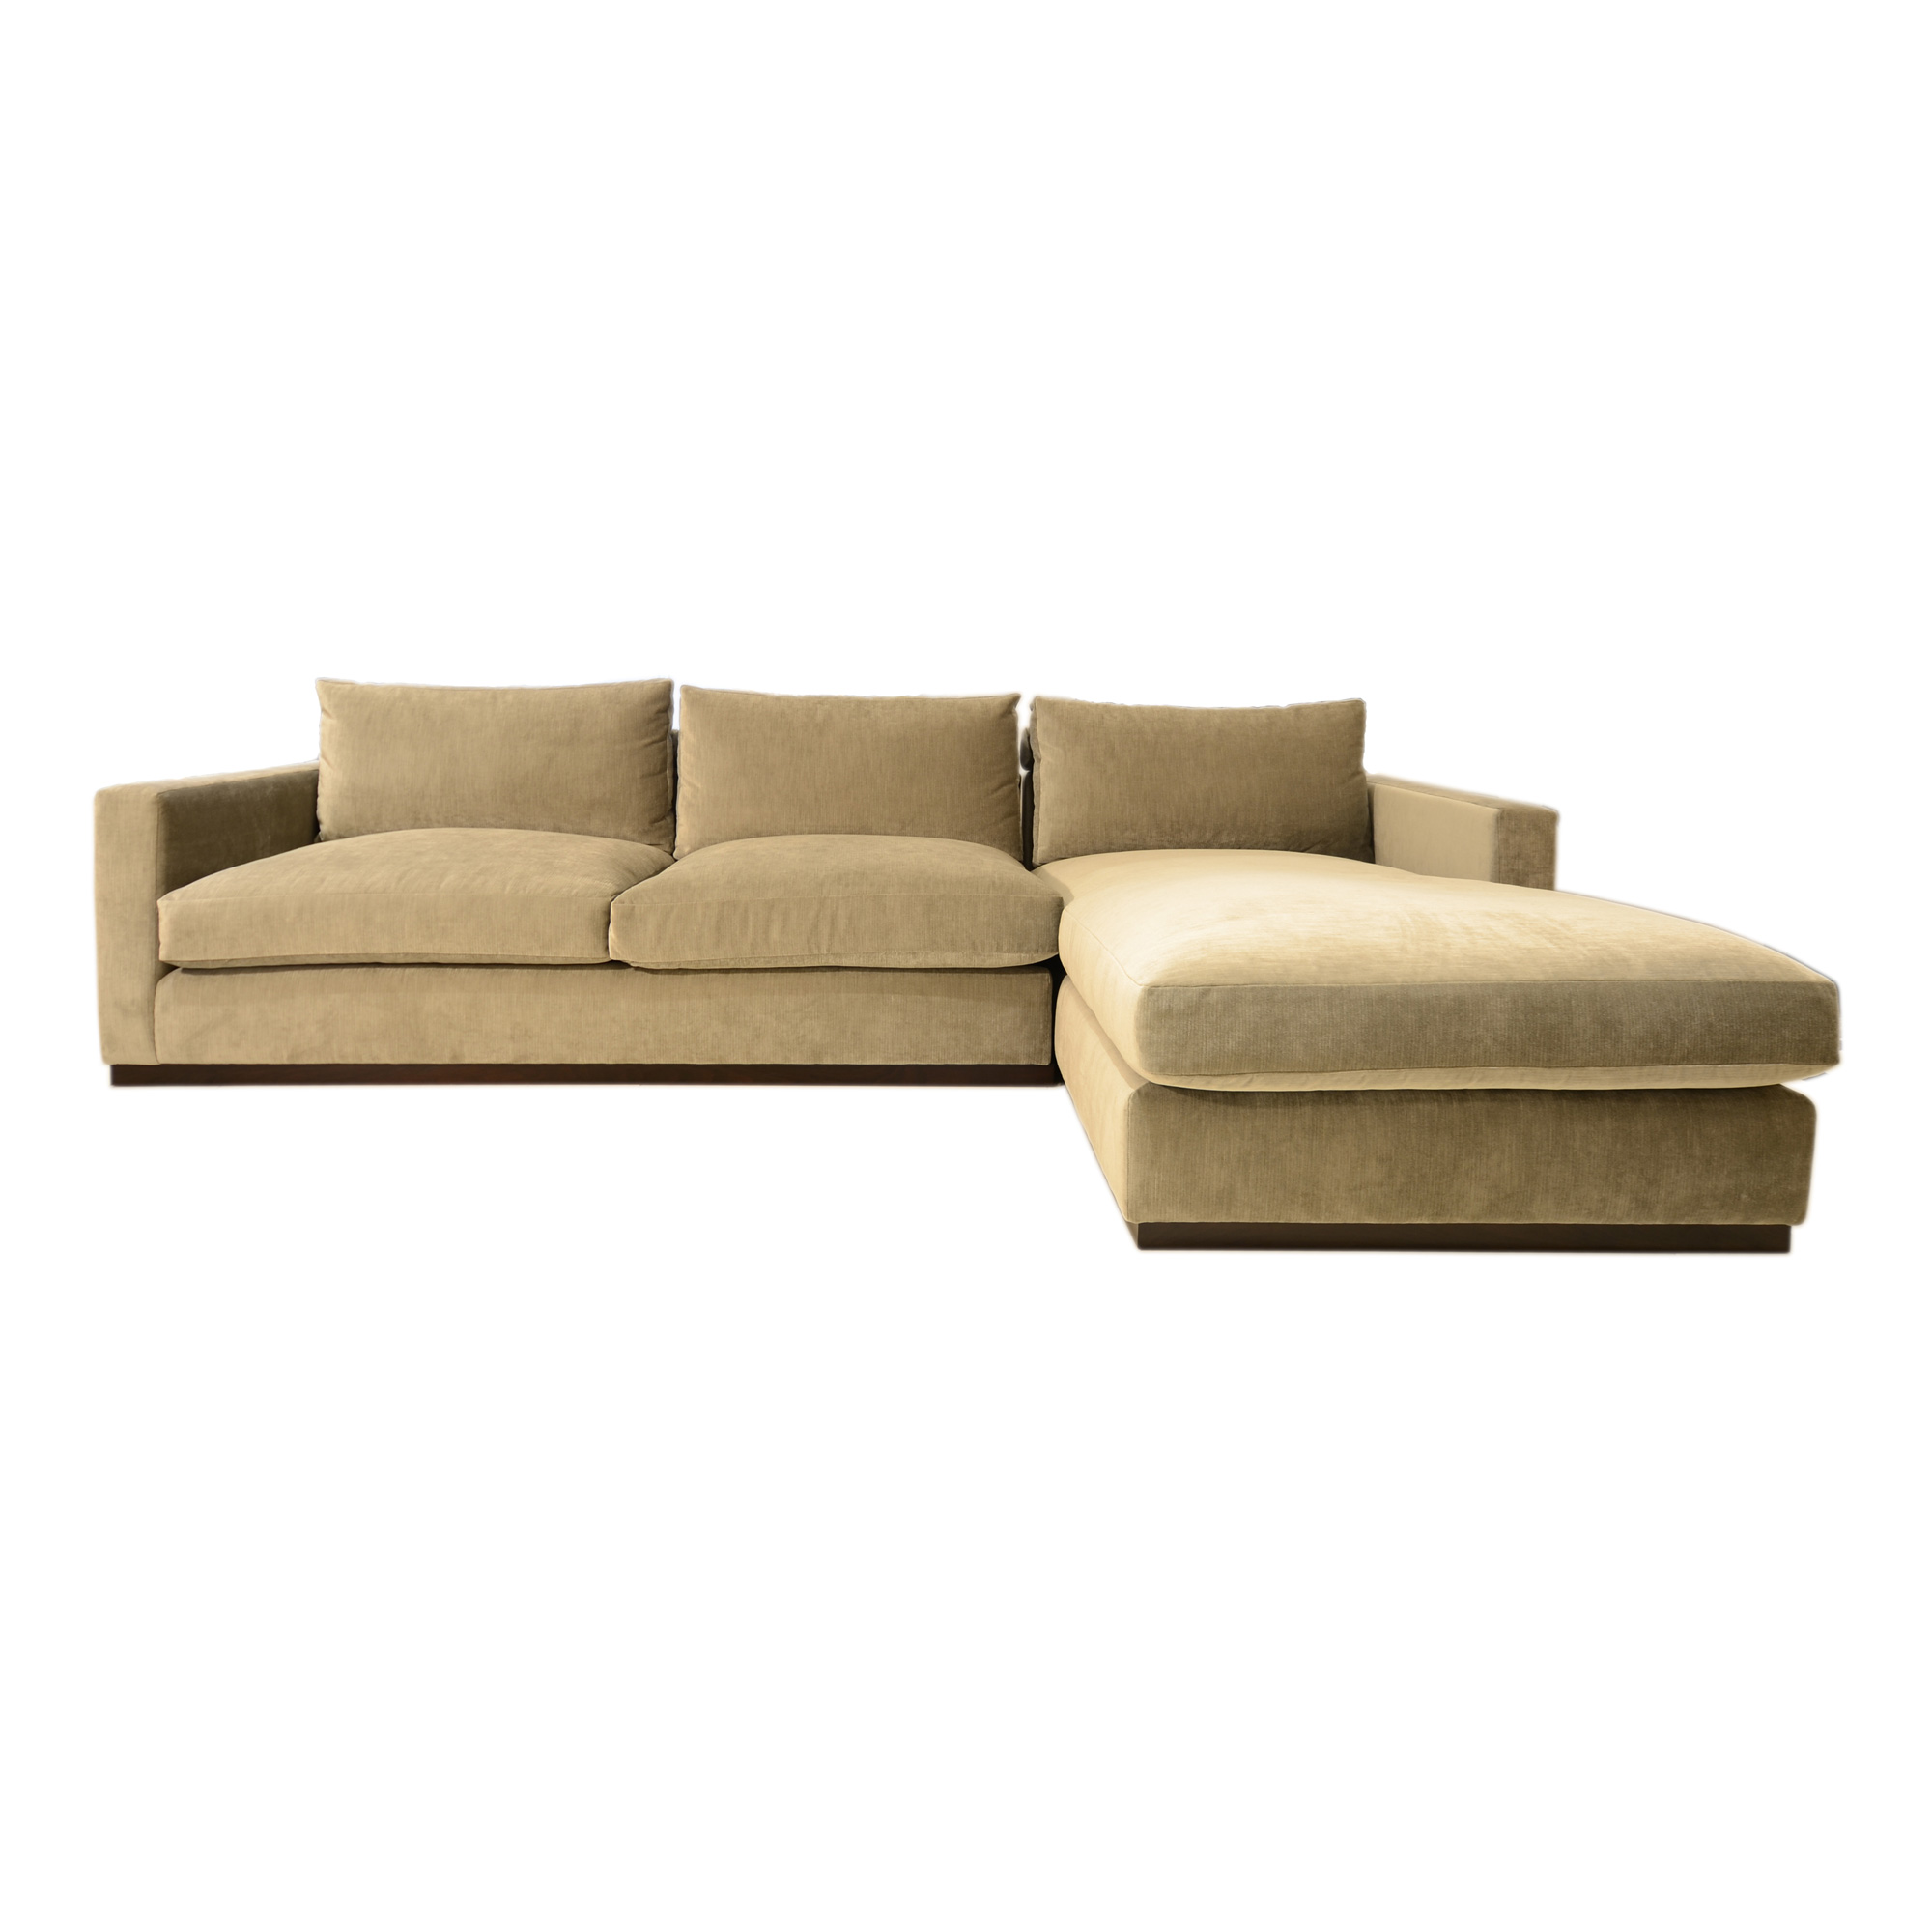 front view of chelsea sofa